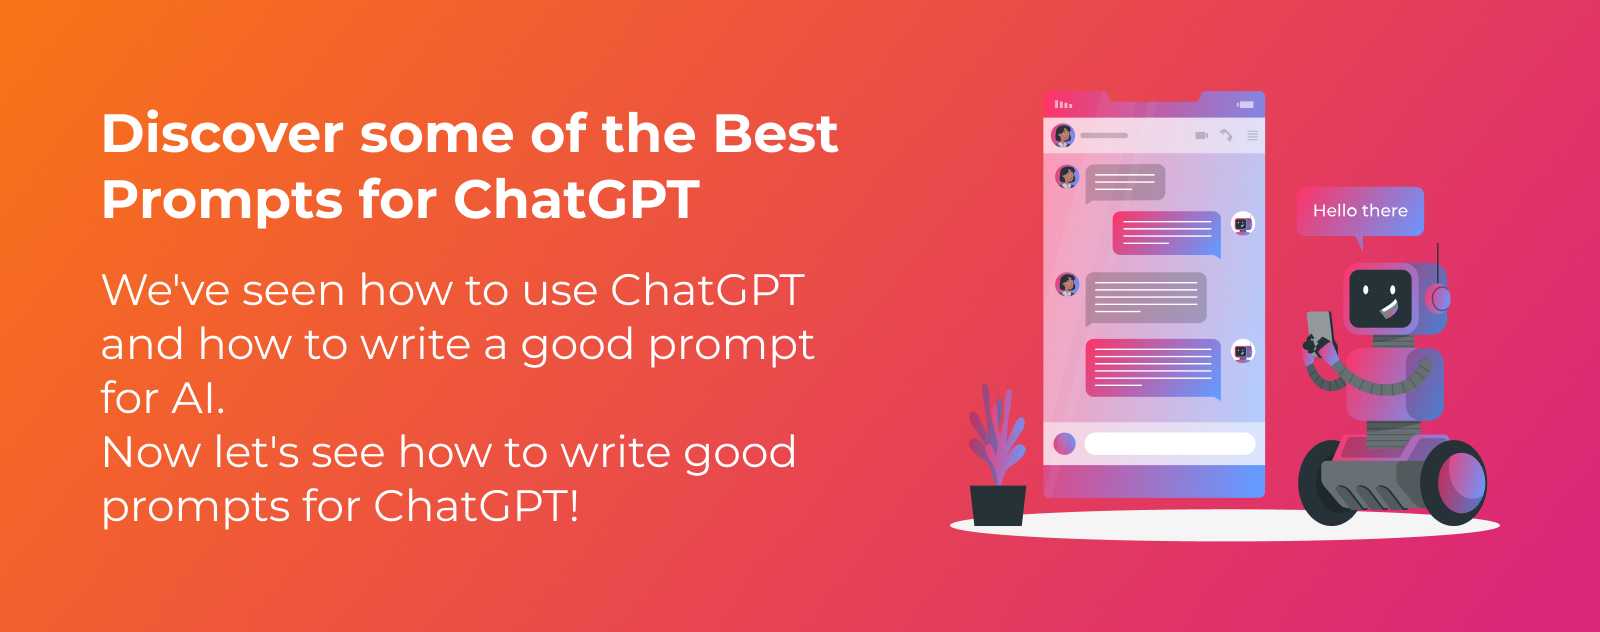 How to write better prompts on ChatGPT?